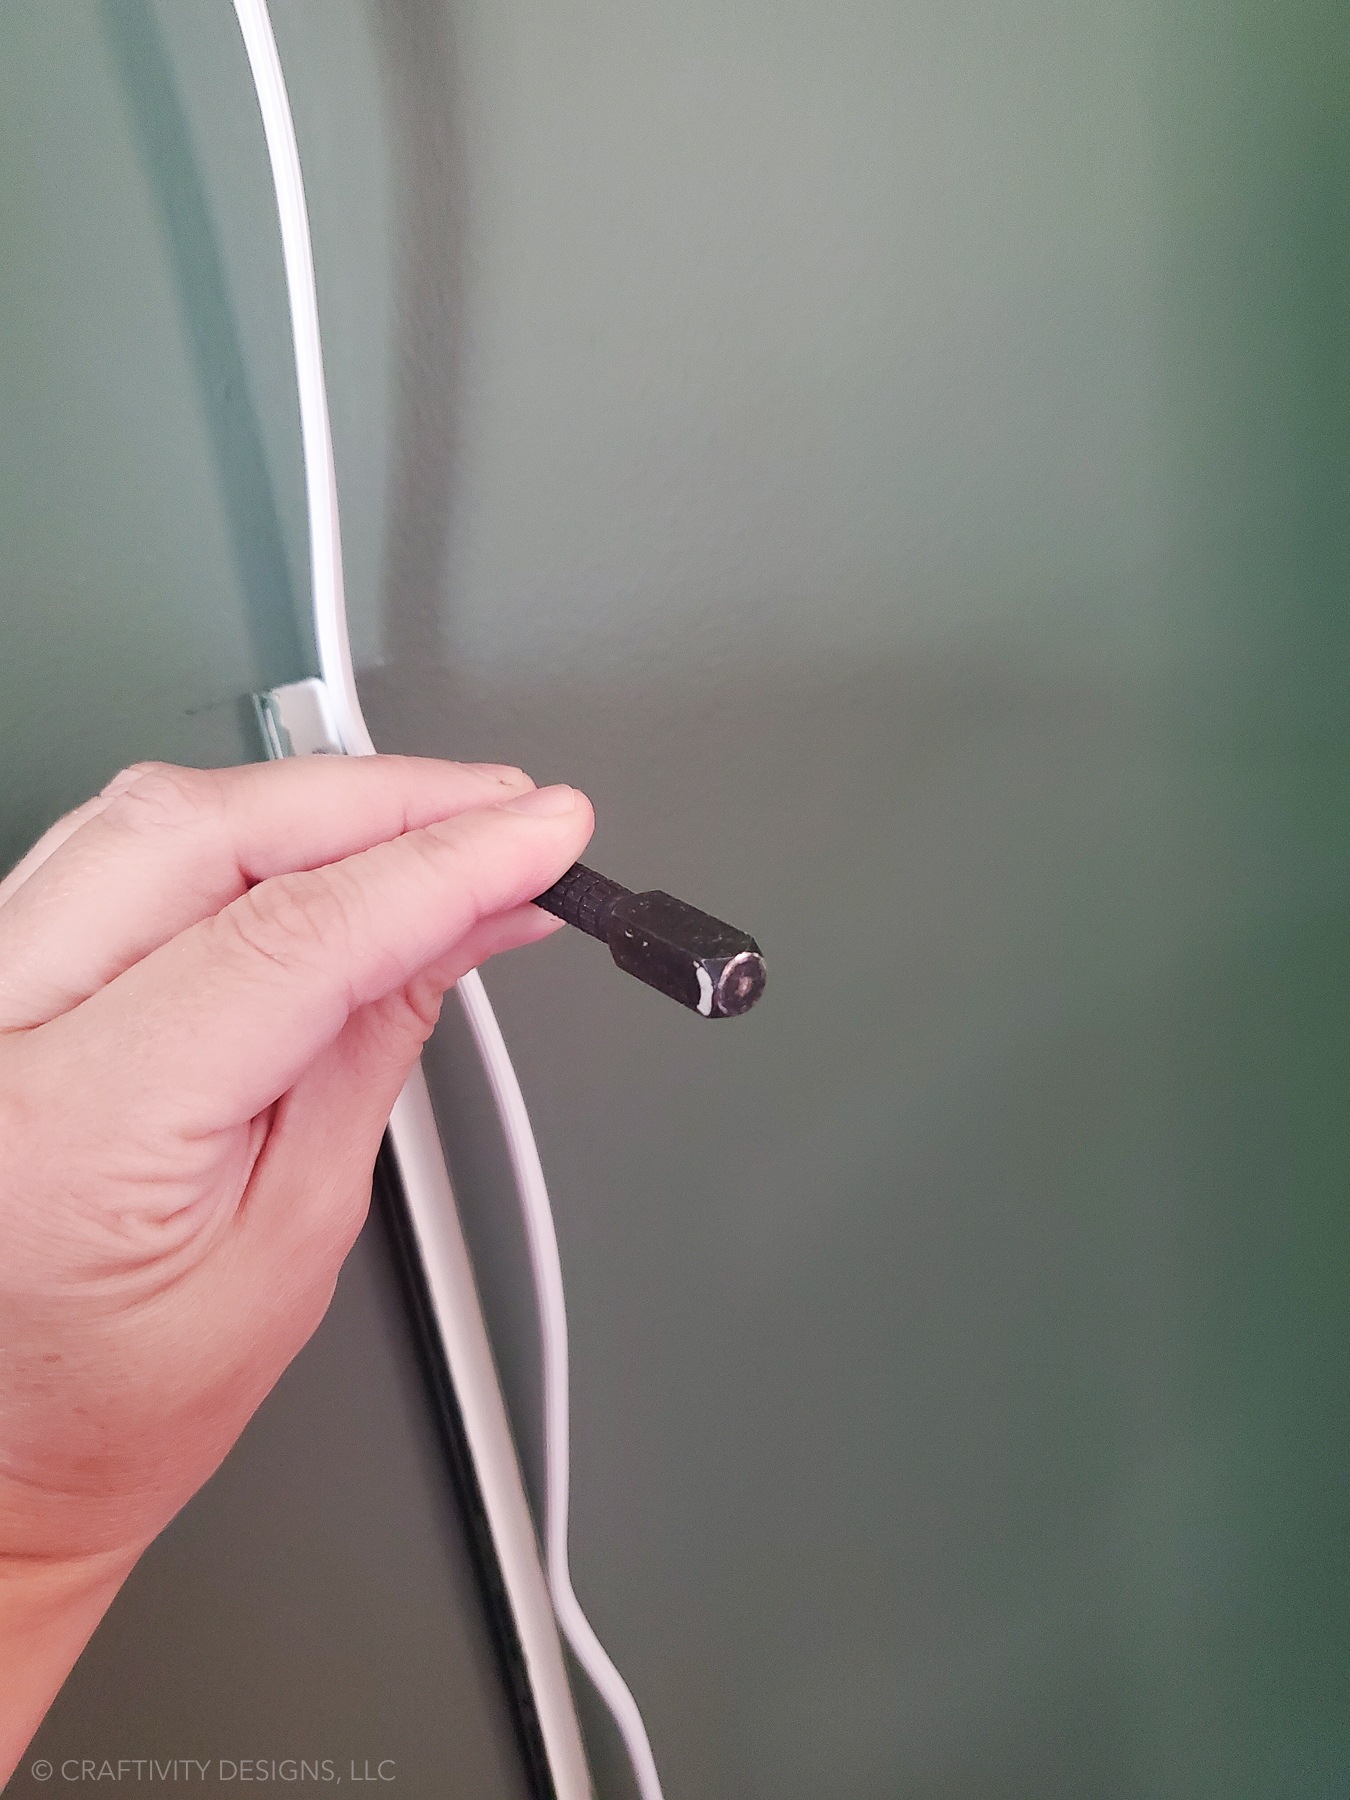 how to install cord covers for walls with nails instead of adhesive